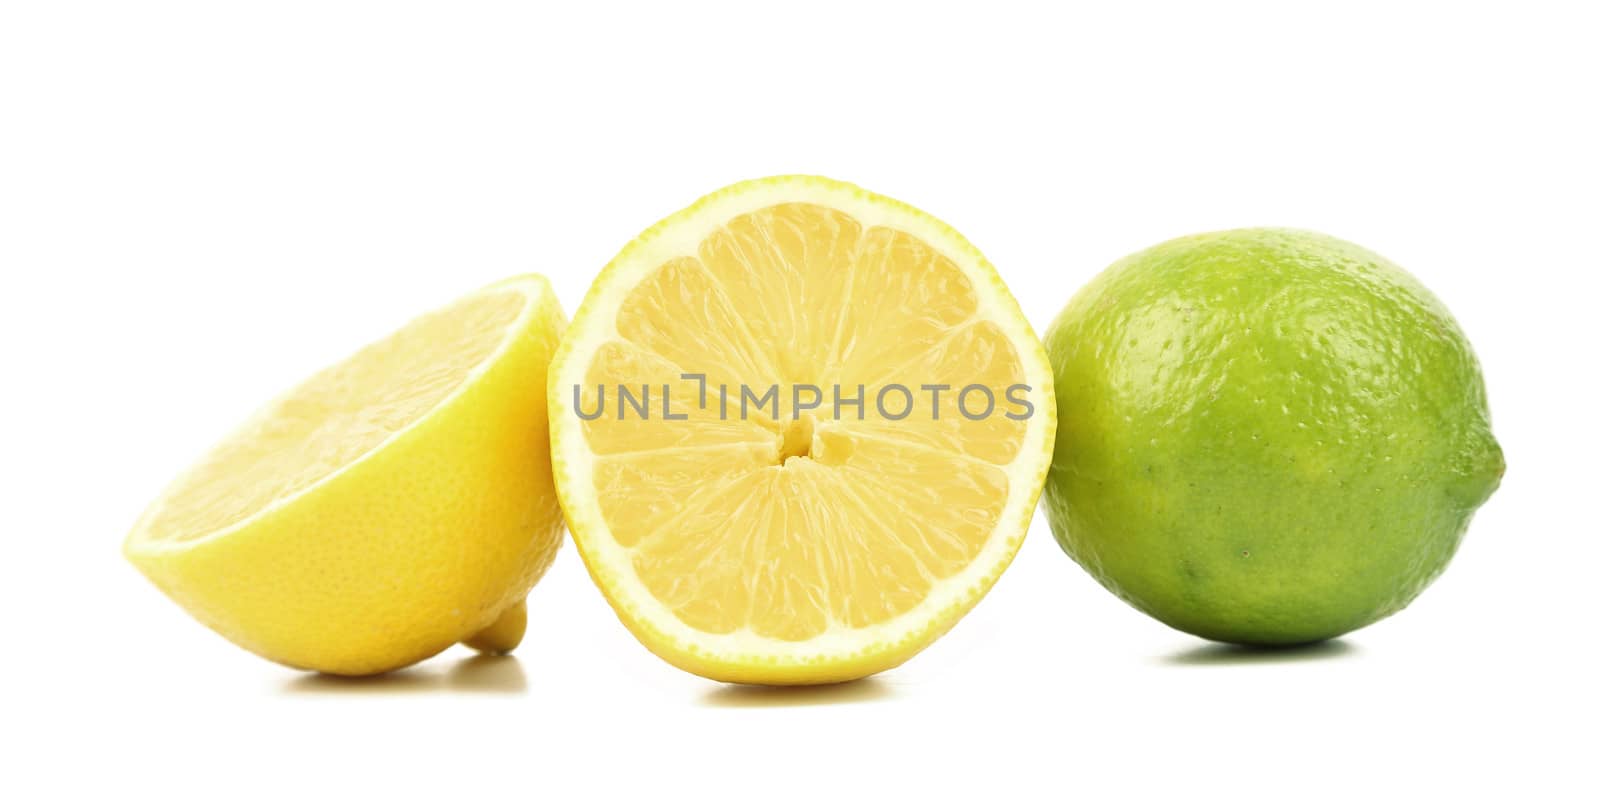 Lime and lemon slices. Isolated on a white background.